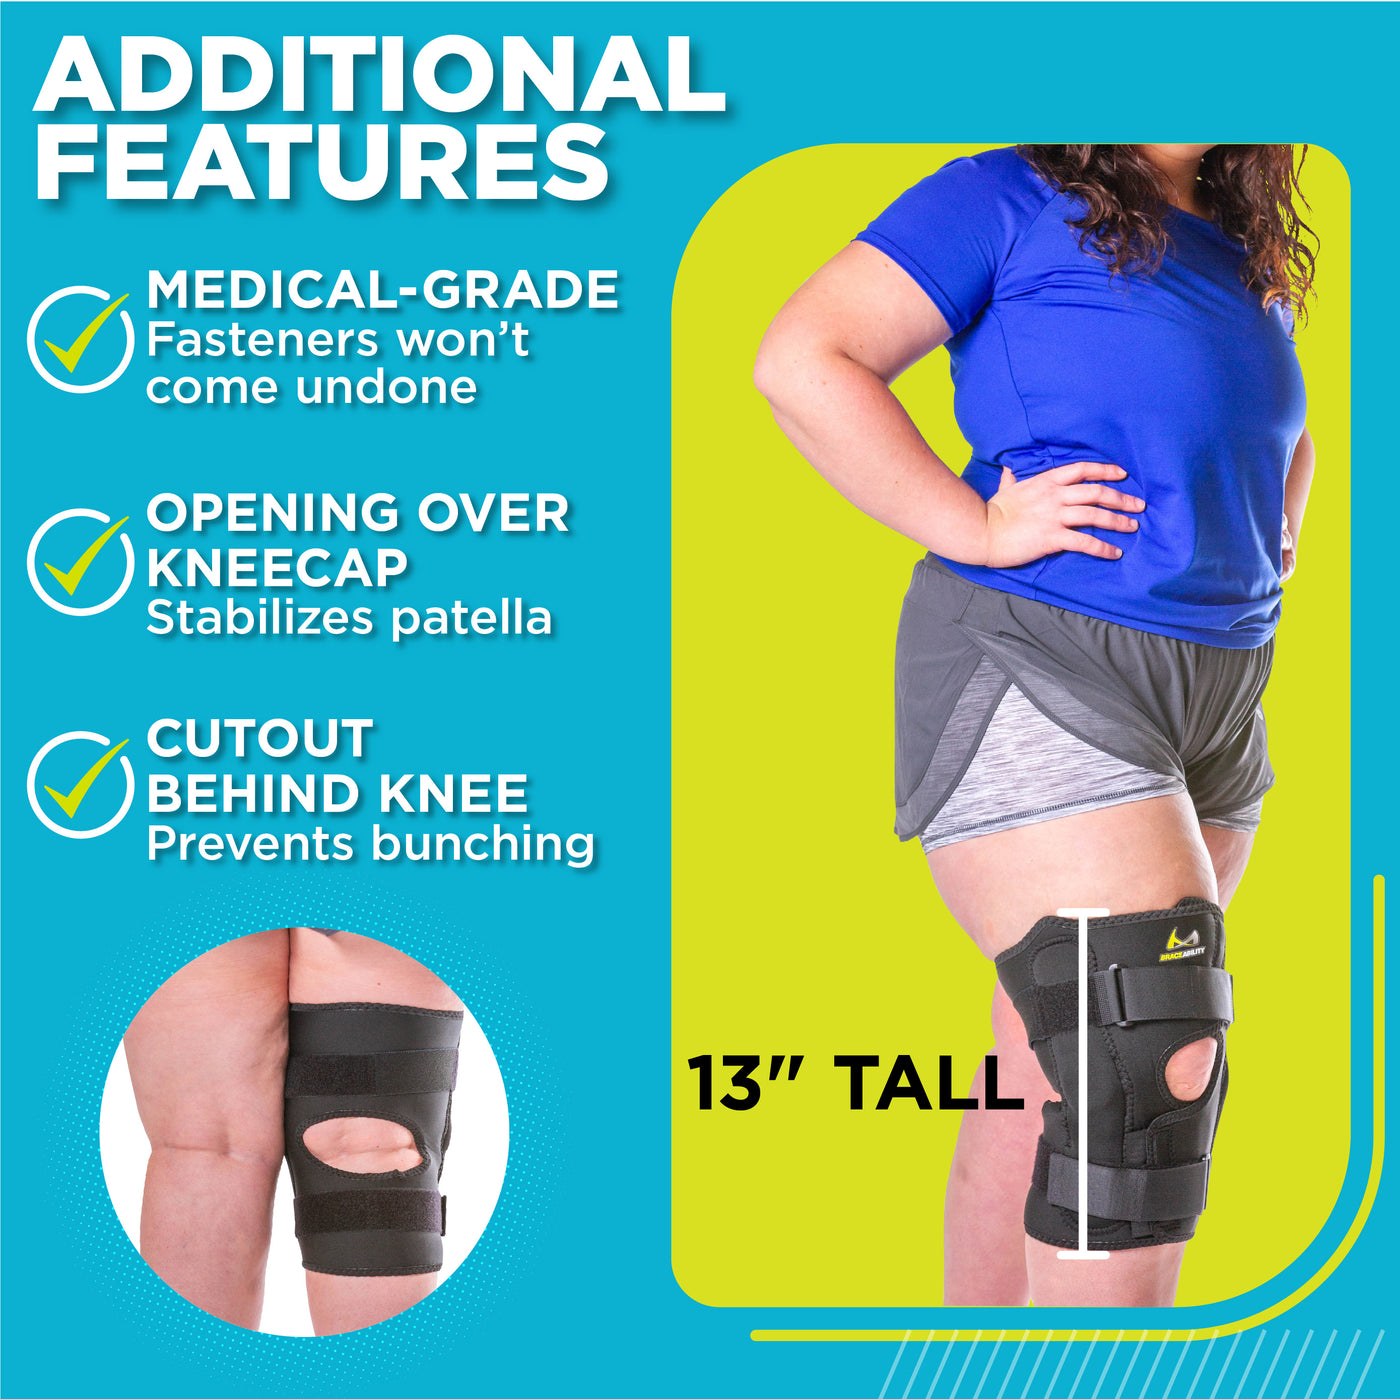 Opening over kneecap and behind knee allow for more stability and less bunching on the plus size knee brace for obesity